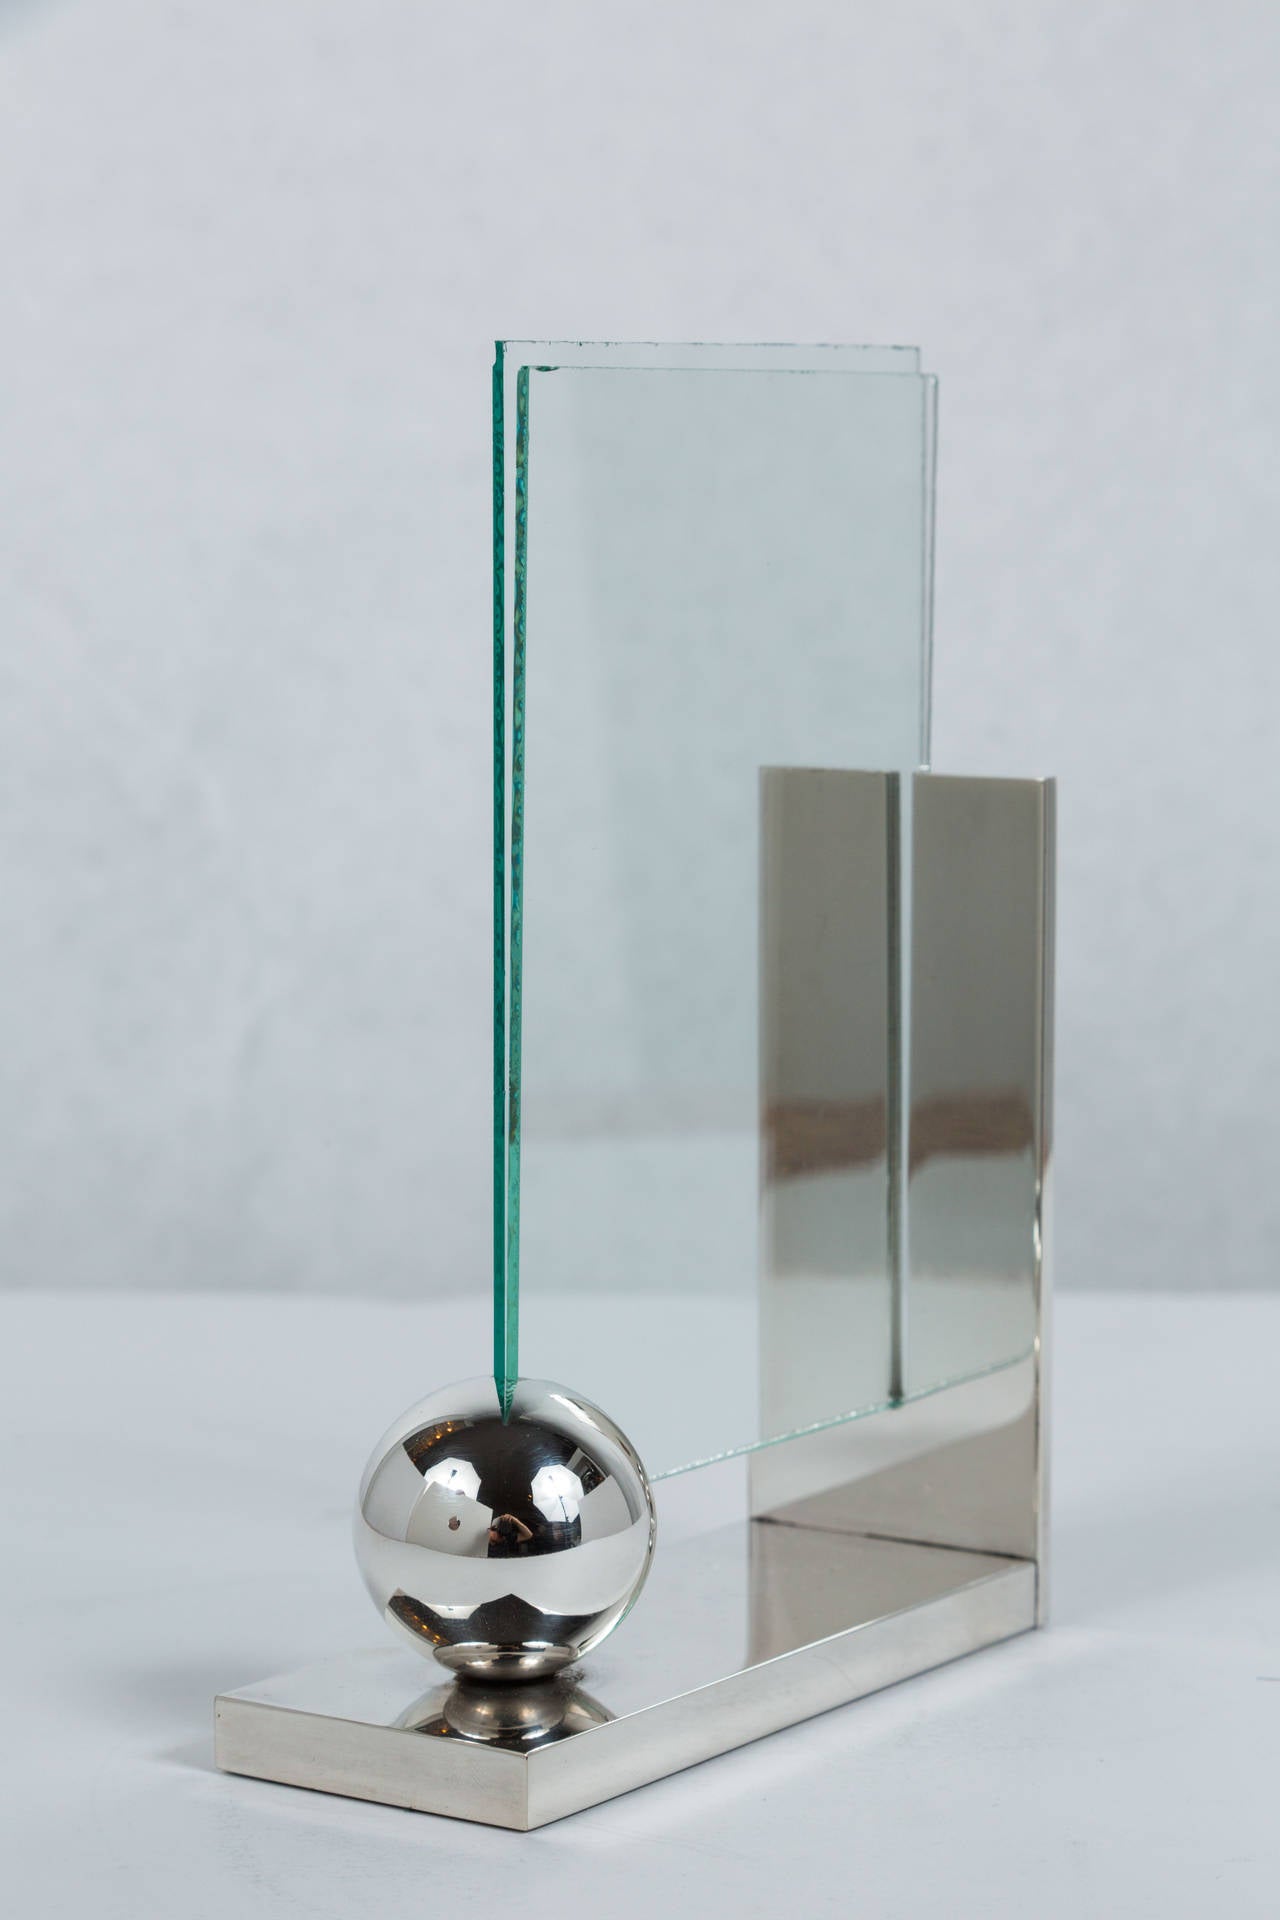 Elegant and simple silver plate frame with two floating pieces of glass to add a picture in. The glass is held upright by the back vertical detail and sphere on the front. Glass has minor nicks but can easily be replaced, as it slides entirely out